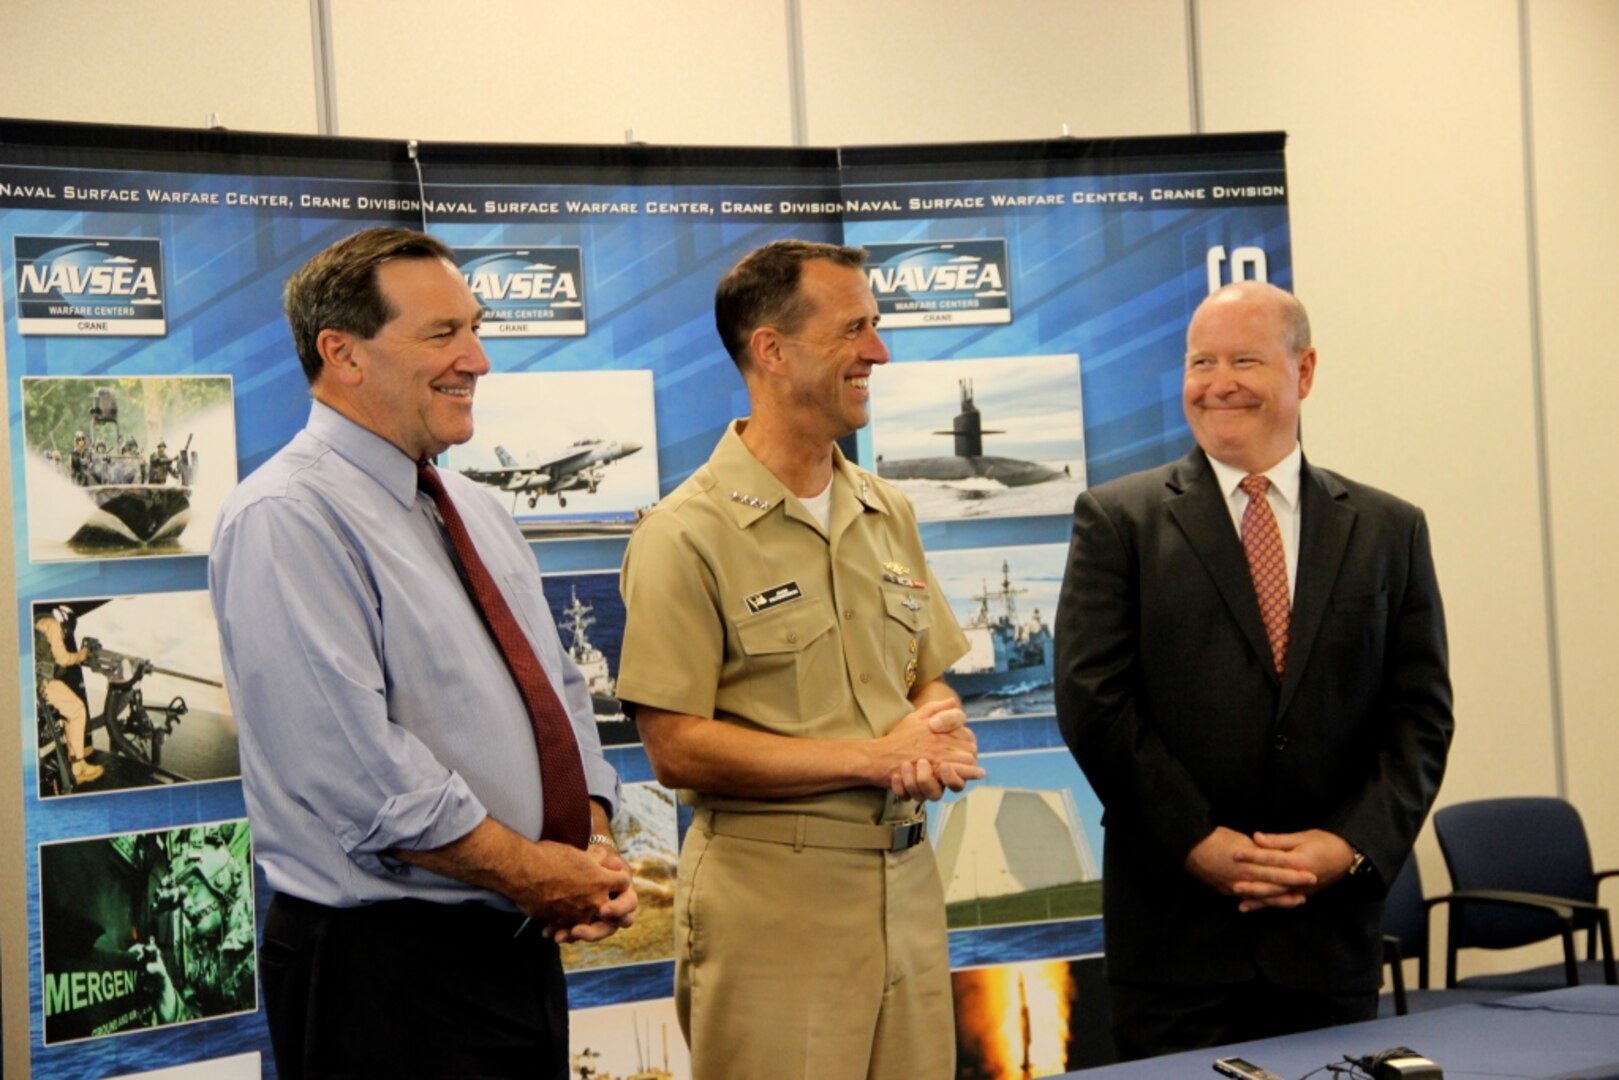 U.S. Senator Joe Donnelly (D-IN), Chief of Naval Operations (CNO) Adm. John Richardson and Congressman Larry Bucshon (IN-8th District) held a press conference on Aug. 23 at Naval Surface Warfare Center (NSWC) Crane Division.